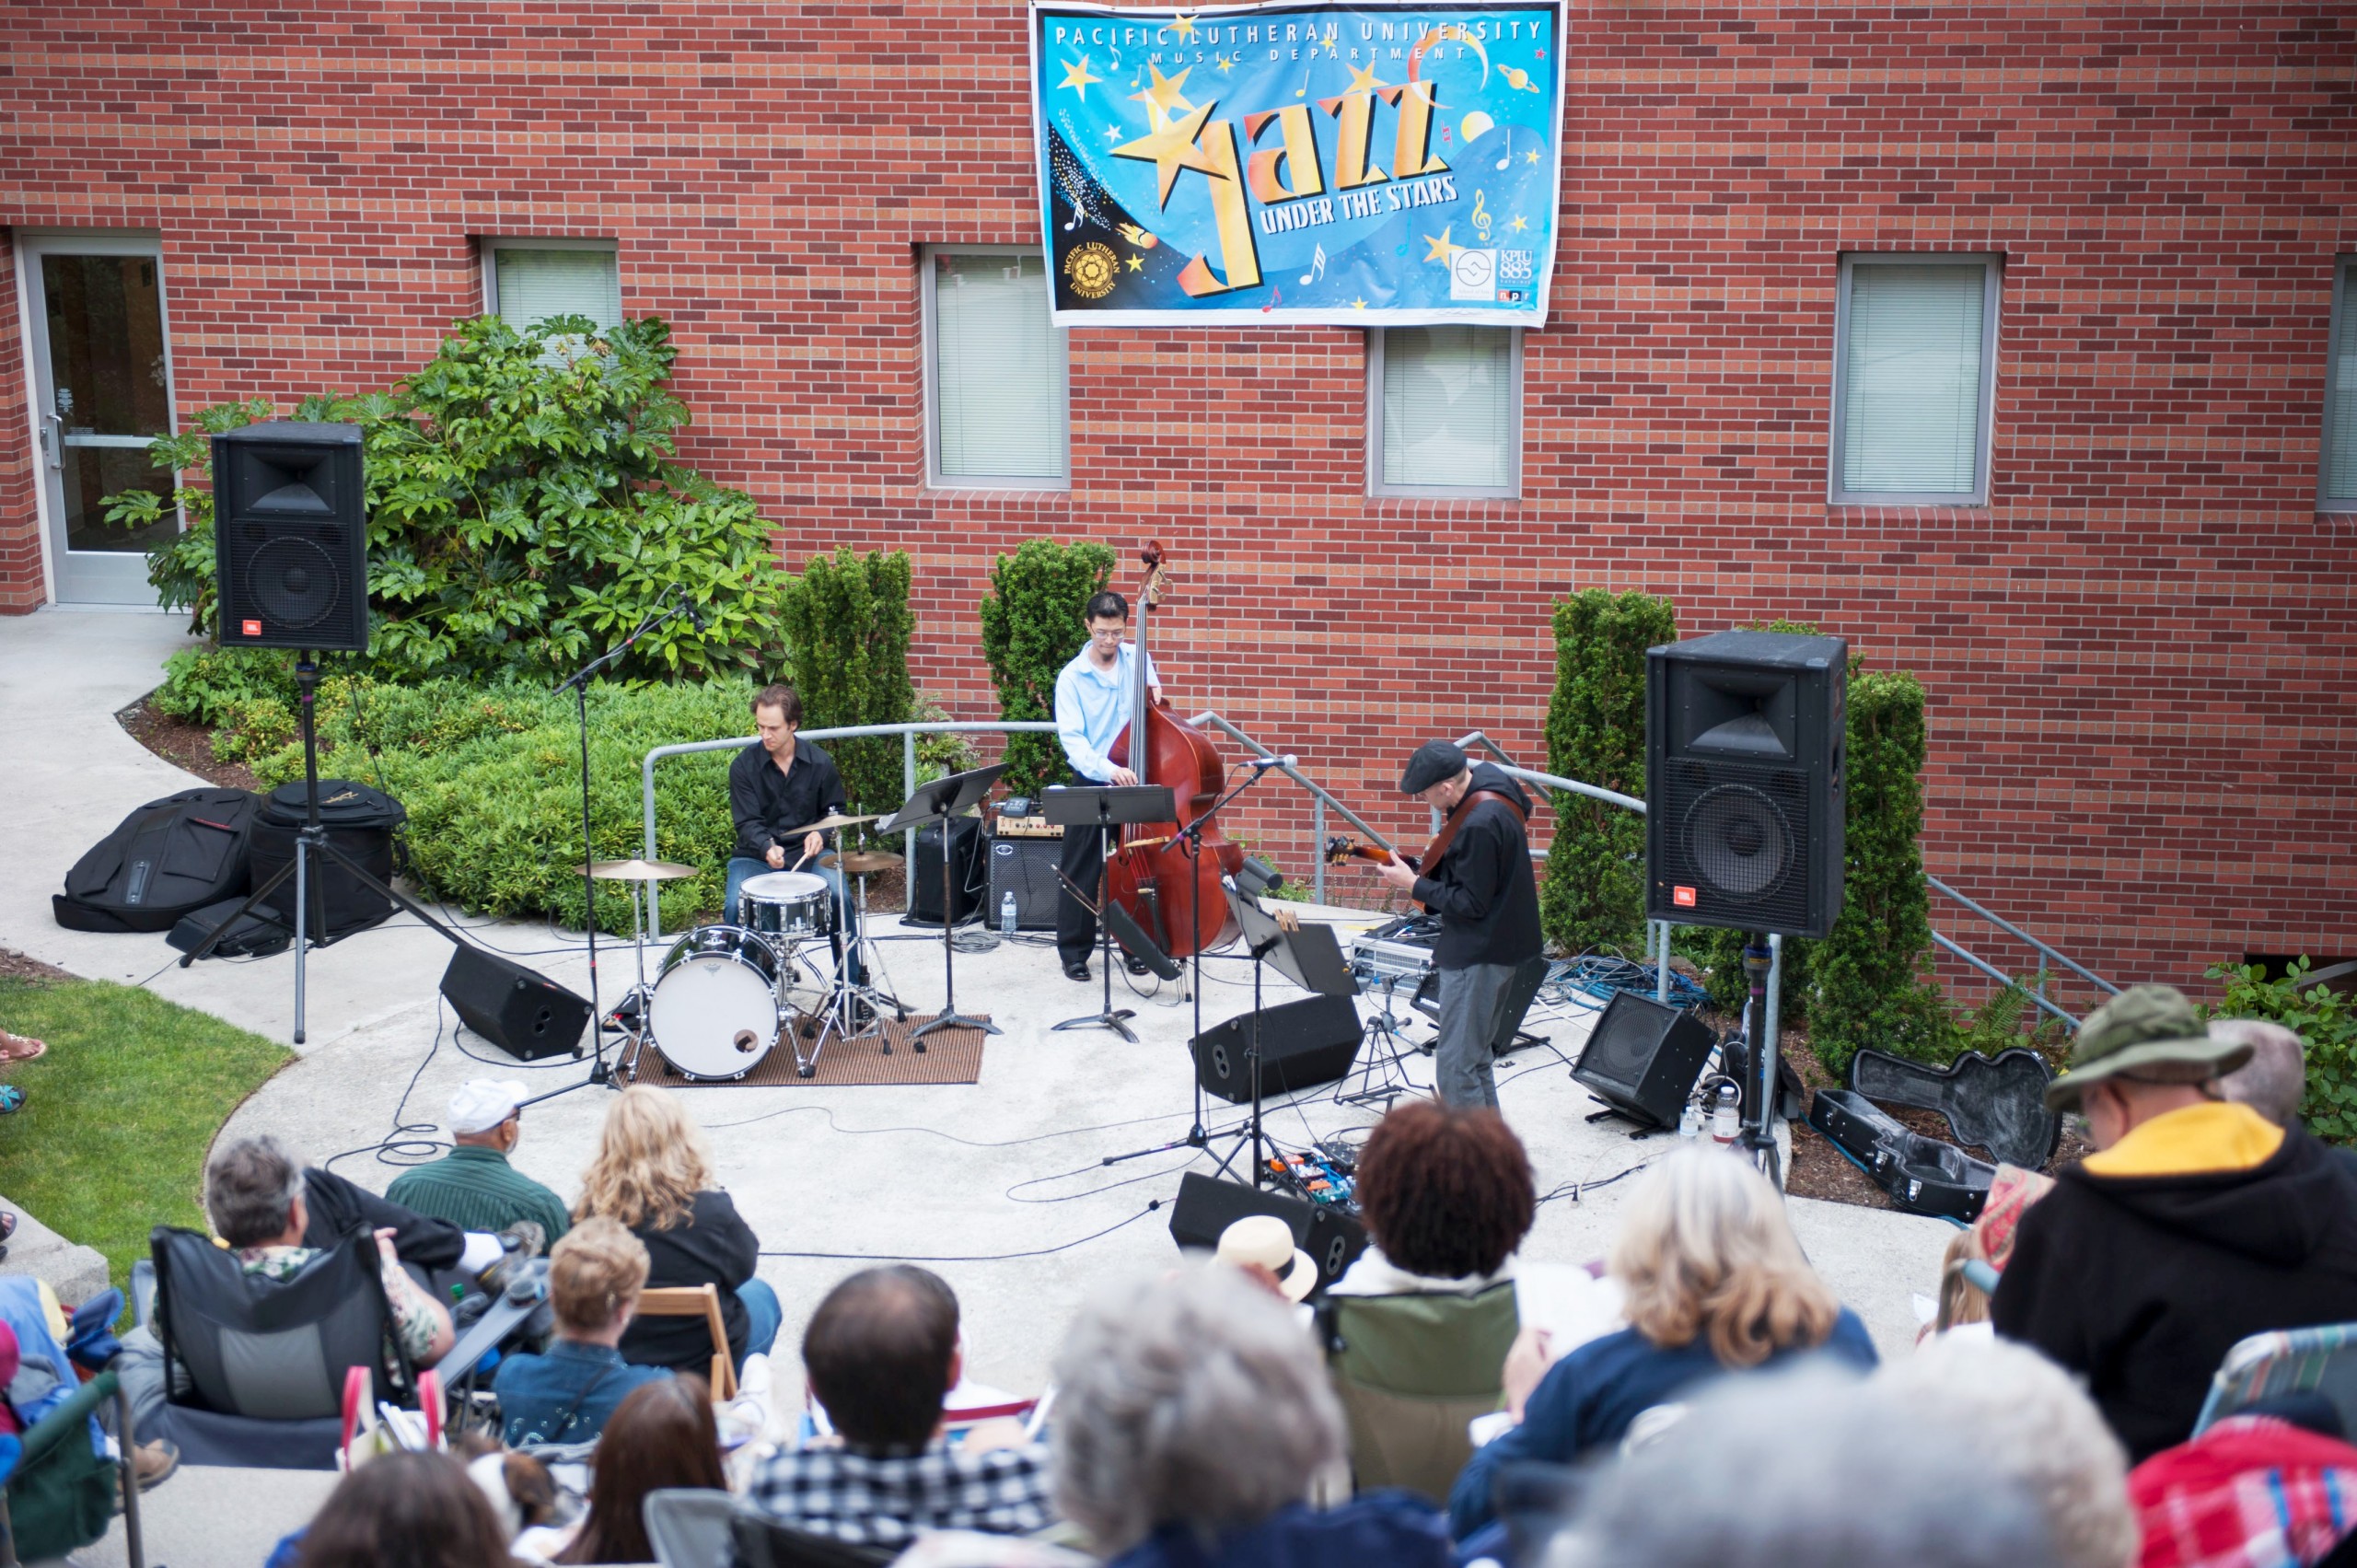 15th Annual Jazz under the Stars in 2013 in the Mary Baker Russell Amphitheater (Photo/ John Struzenberg '15)